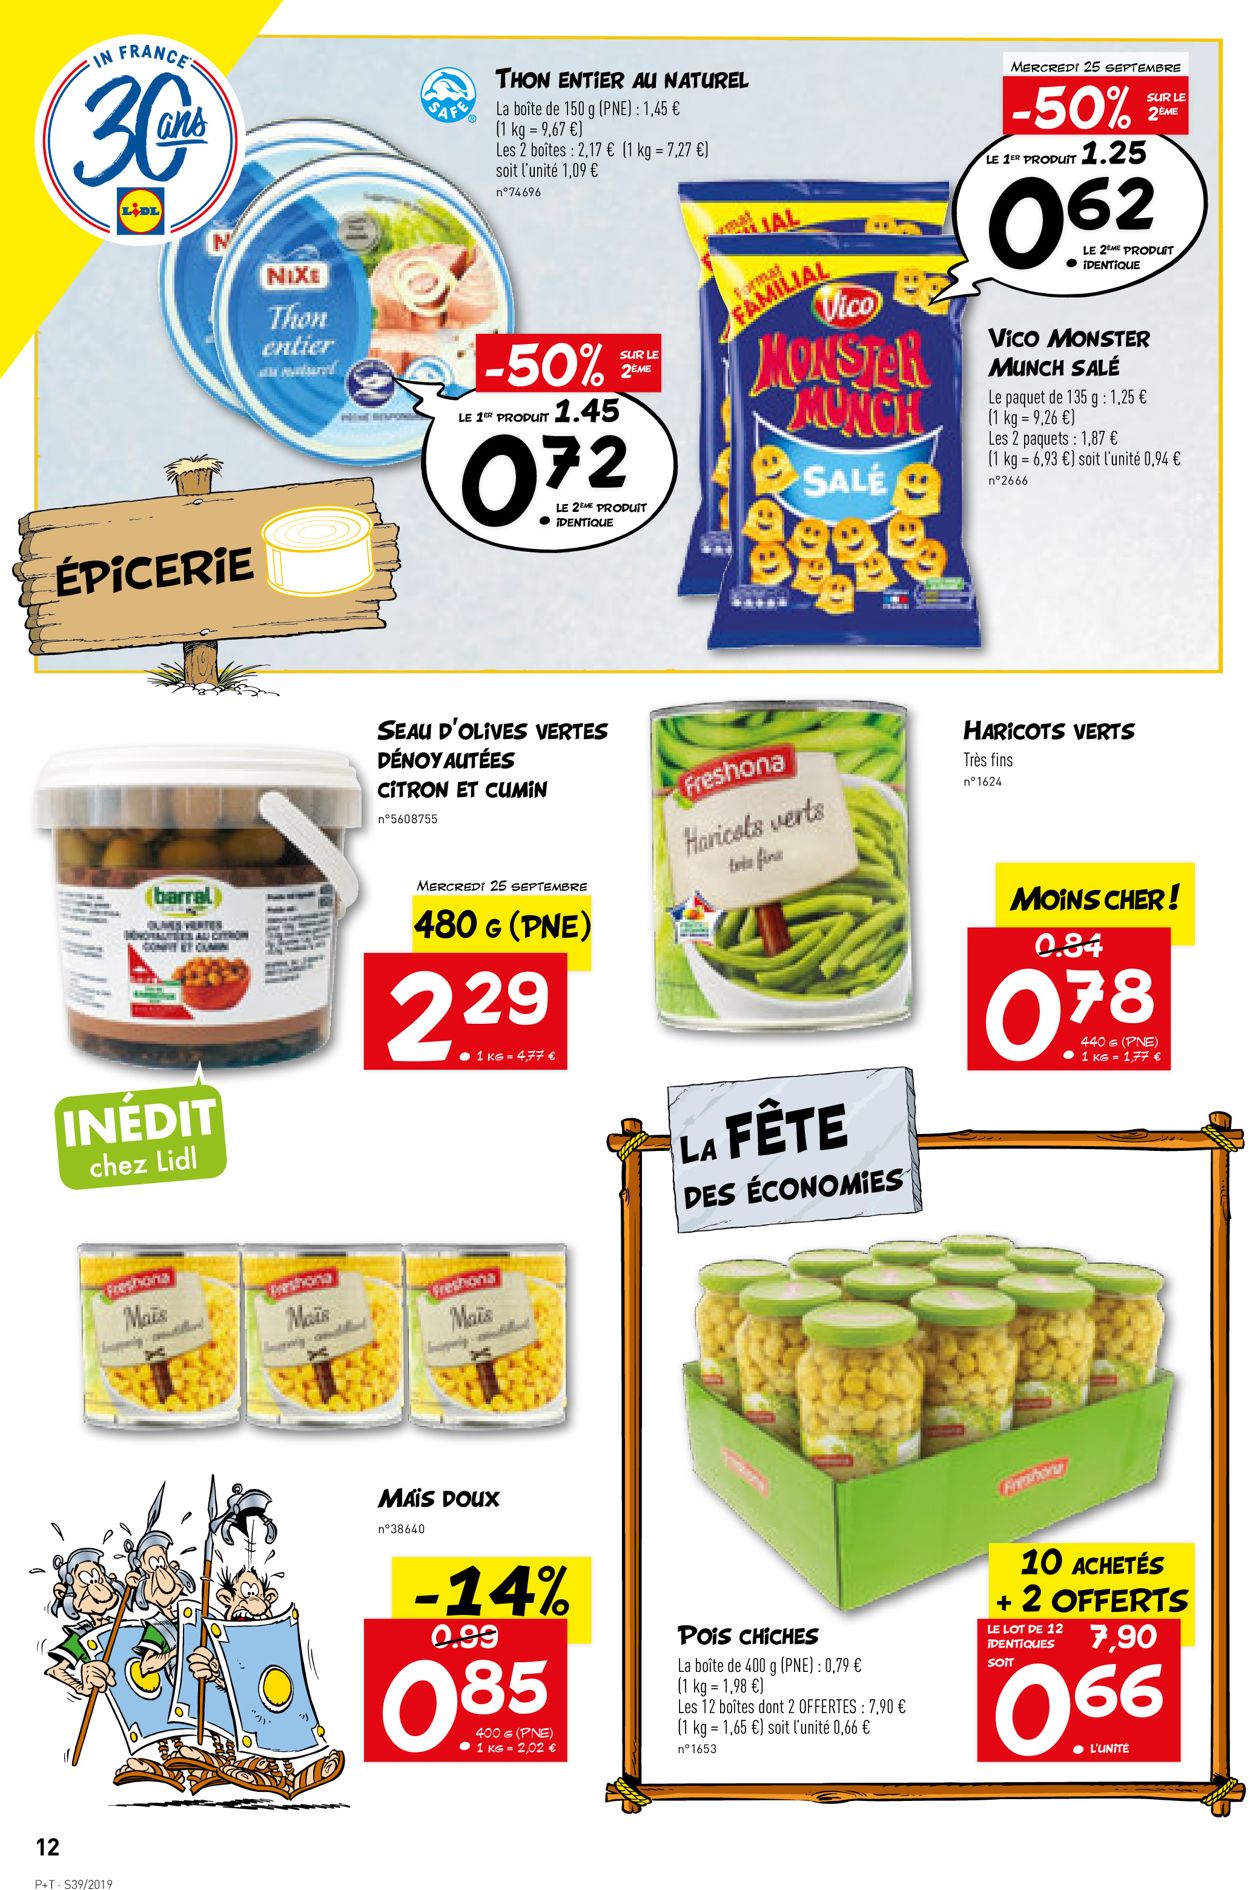 Lidl Catalogue - 25.09-01.10.2019 (Page 12)